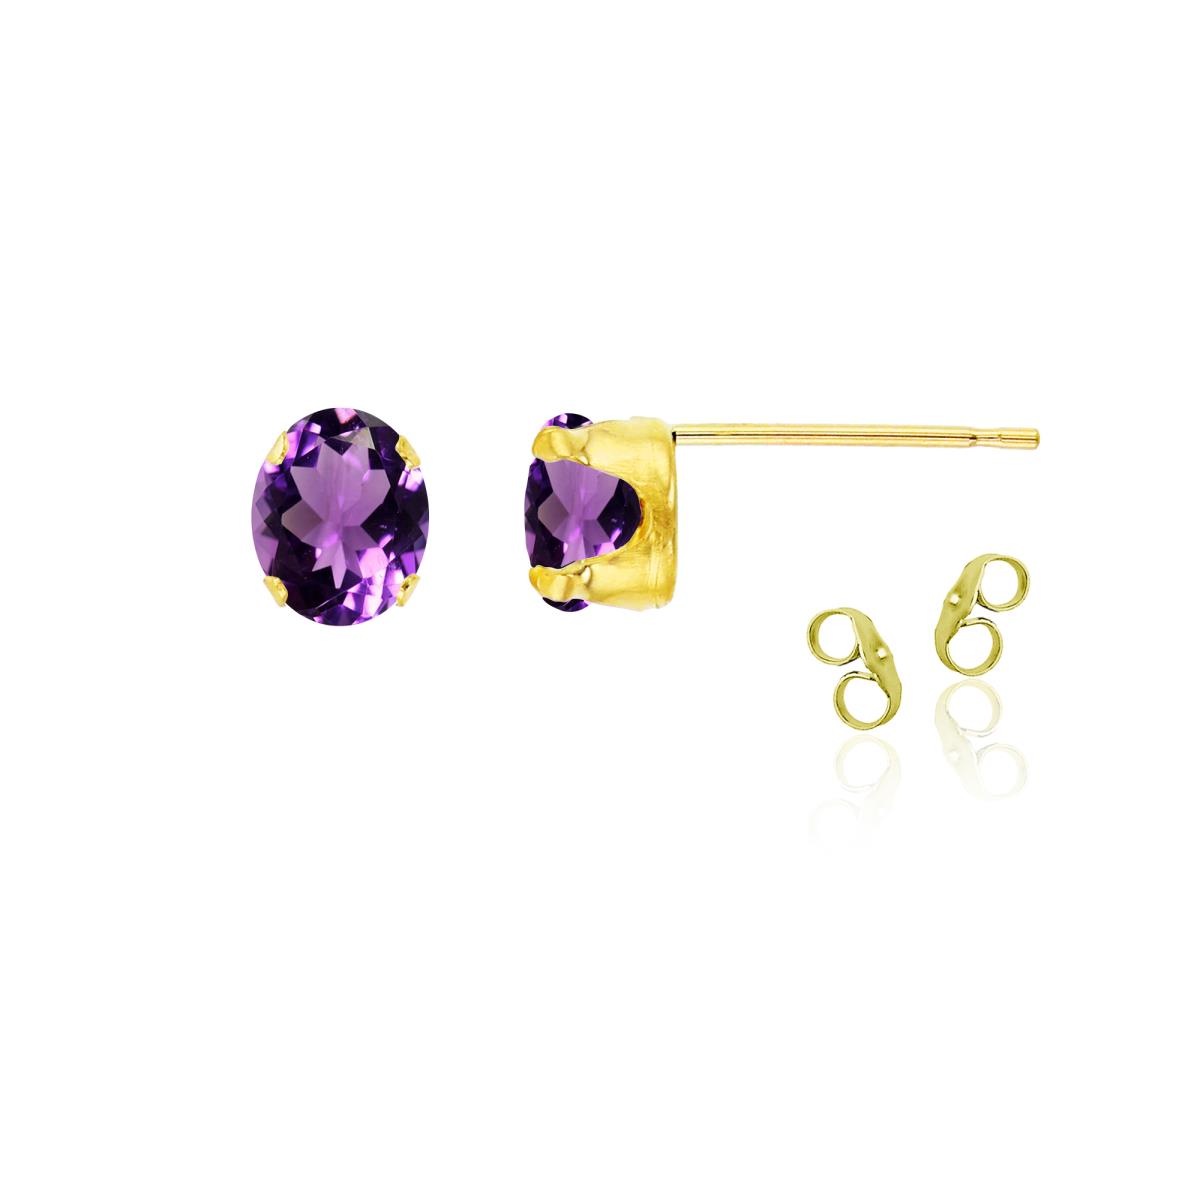 Sterling Silver Yellow 6x4mm Oval Amethyst Stud Earring with Clutch